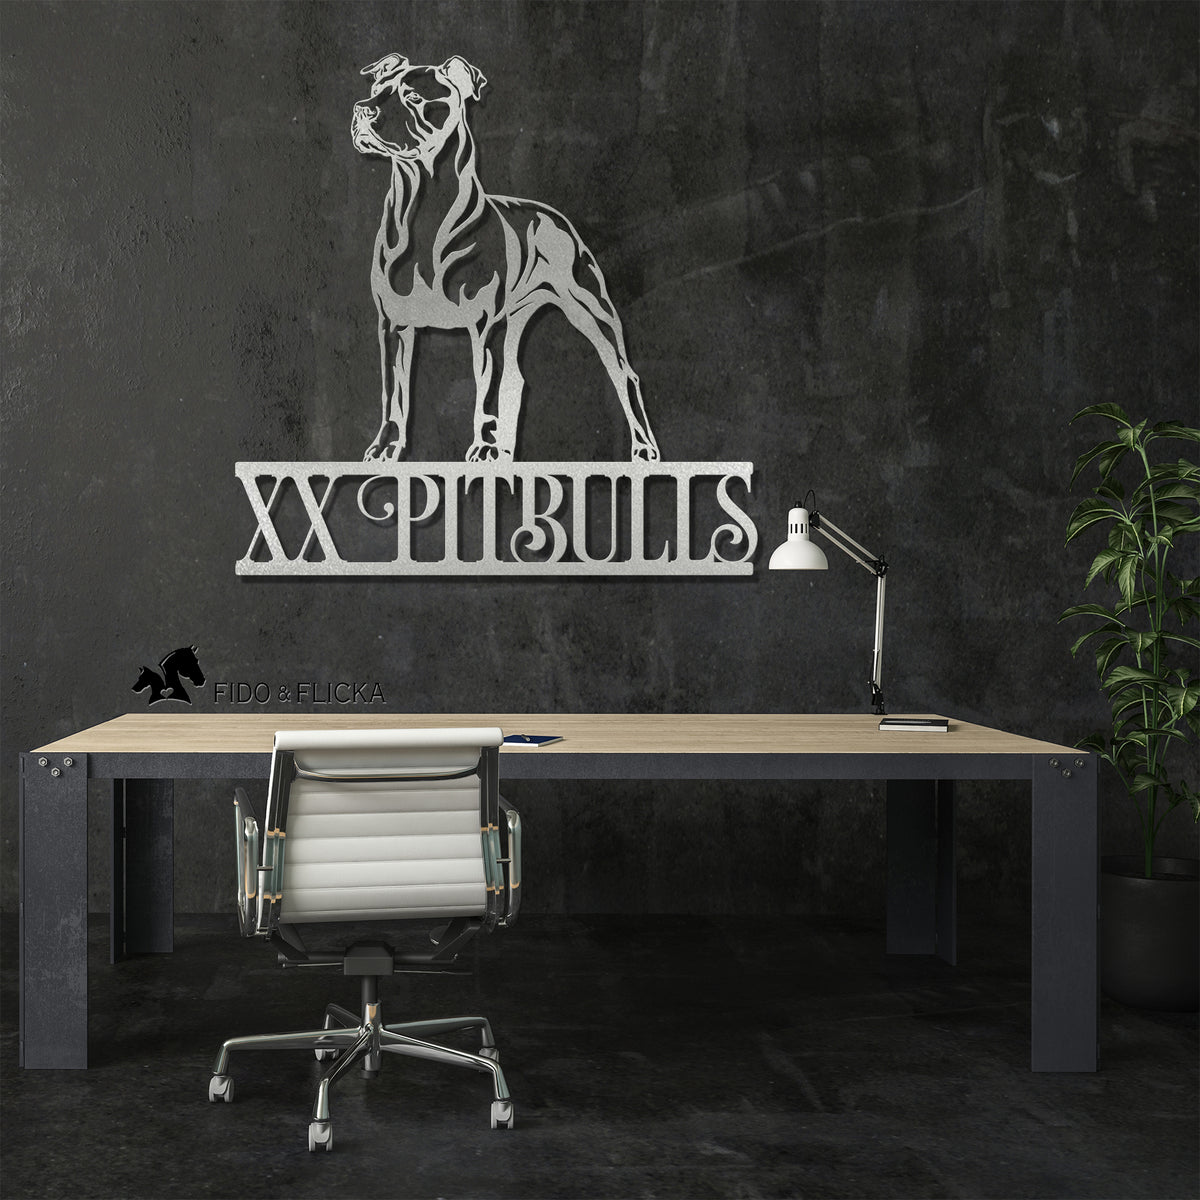 silver metal pitbull sign on dark wall in office